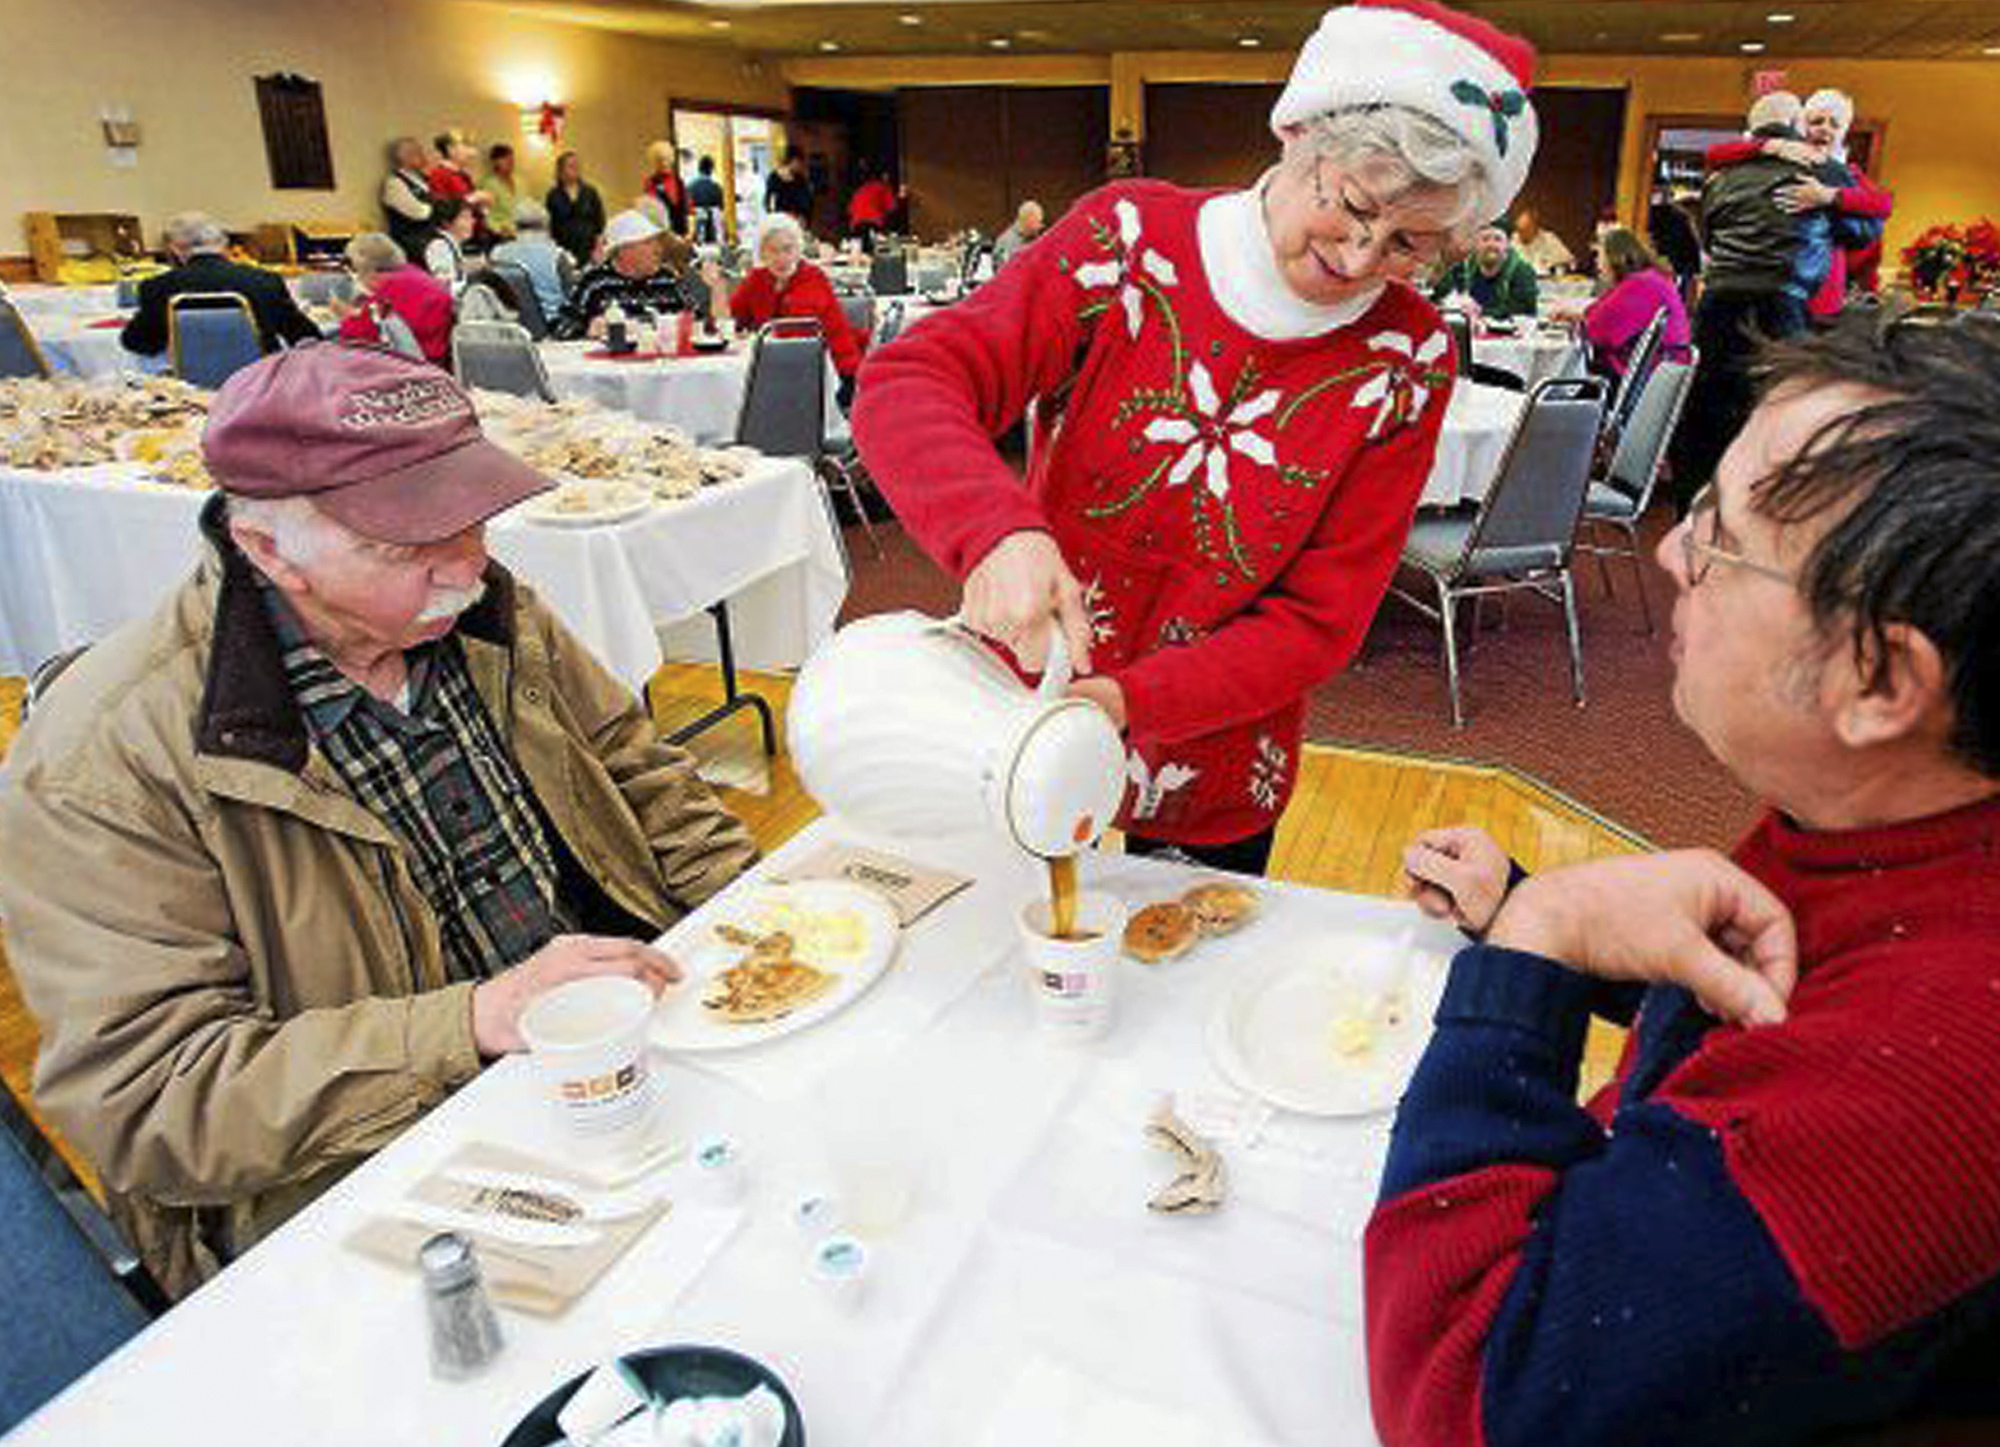 In this December 2011 photo, Connie Howe pours coffee for Ronald Read, left, and Dave Smith during the Charlie Slate Memorial Christmas breakfast at the American Legion in Brattleboro, Vt. (AP&mdash;AP)